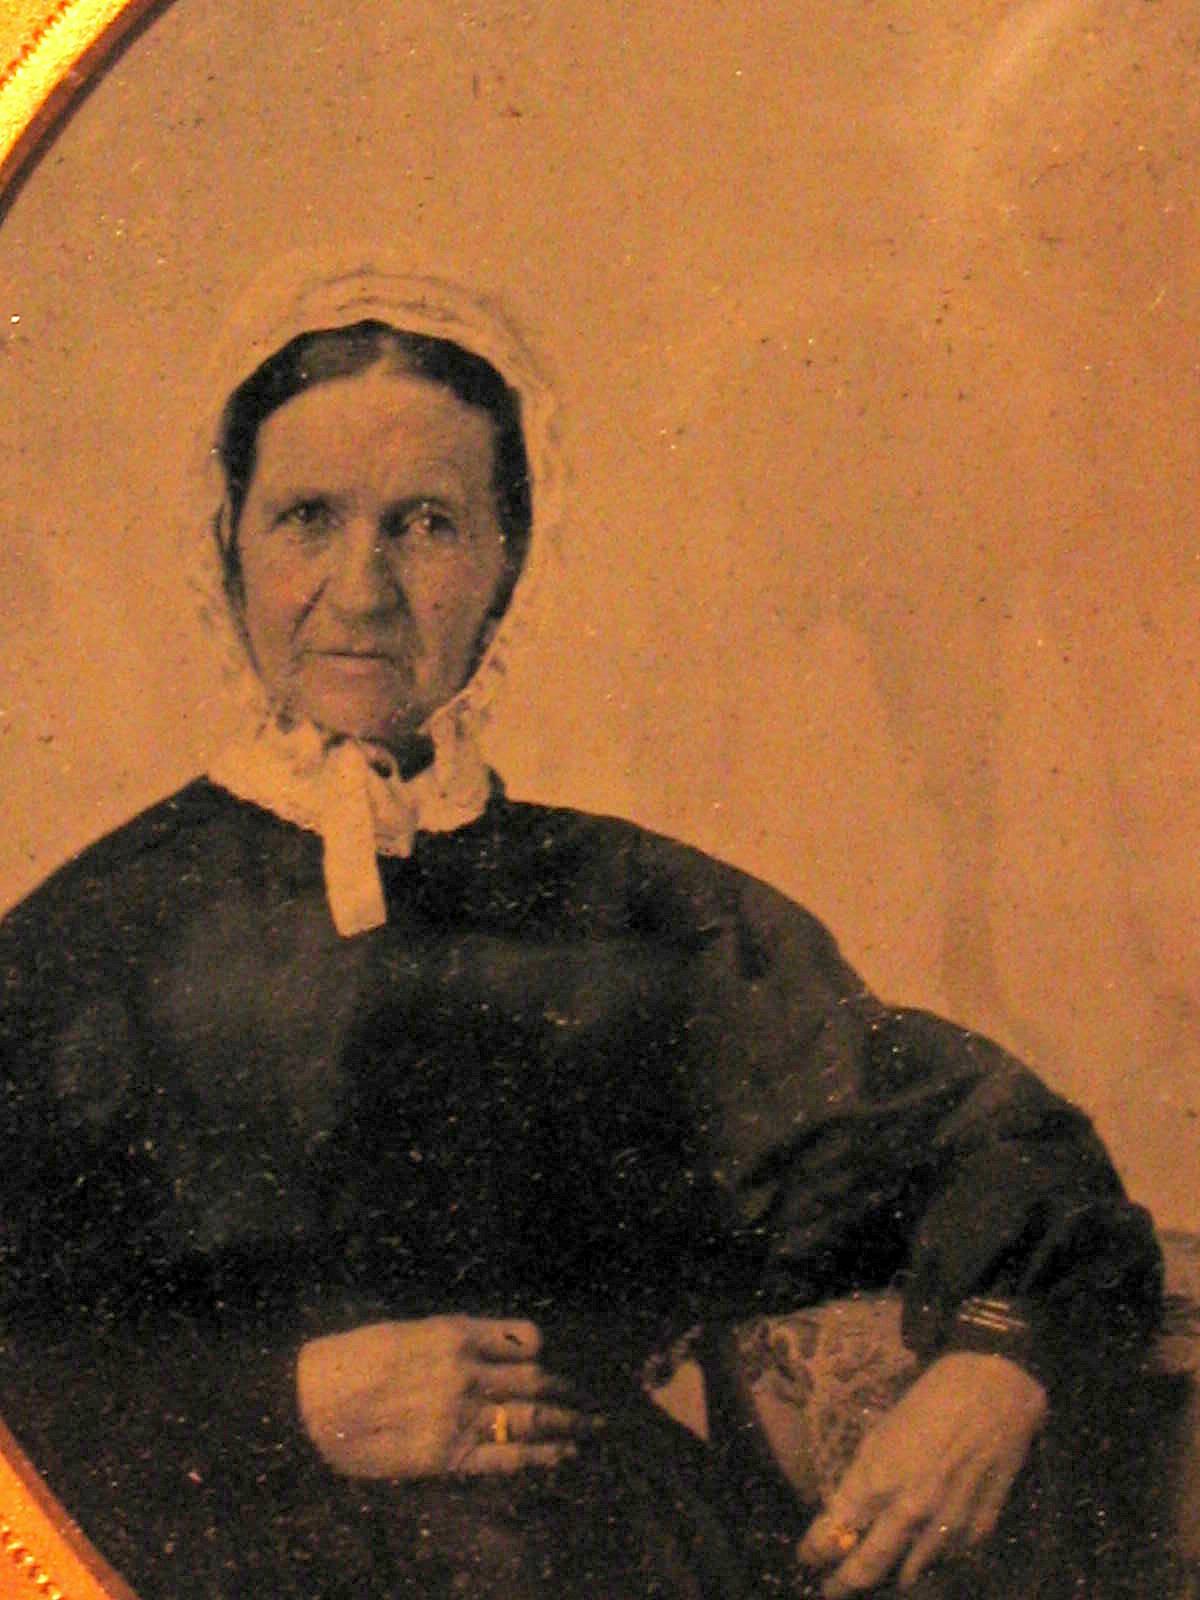 Ambrotype of my great-great-great-grandmother, Minerva Rose Jones, wife of William Jones. Born in New York State about 1800, died in Illinois, Dec. 23, 1884. Buried in Uniontown Cemetery, Uniontown, Knox County, Illinois. Her son, Ephraim R. Jones was an early-day portrait photographer, and this may be his work. View full size.